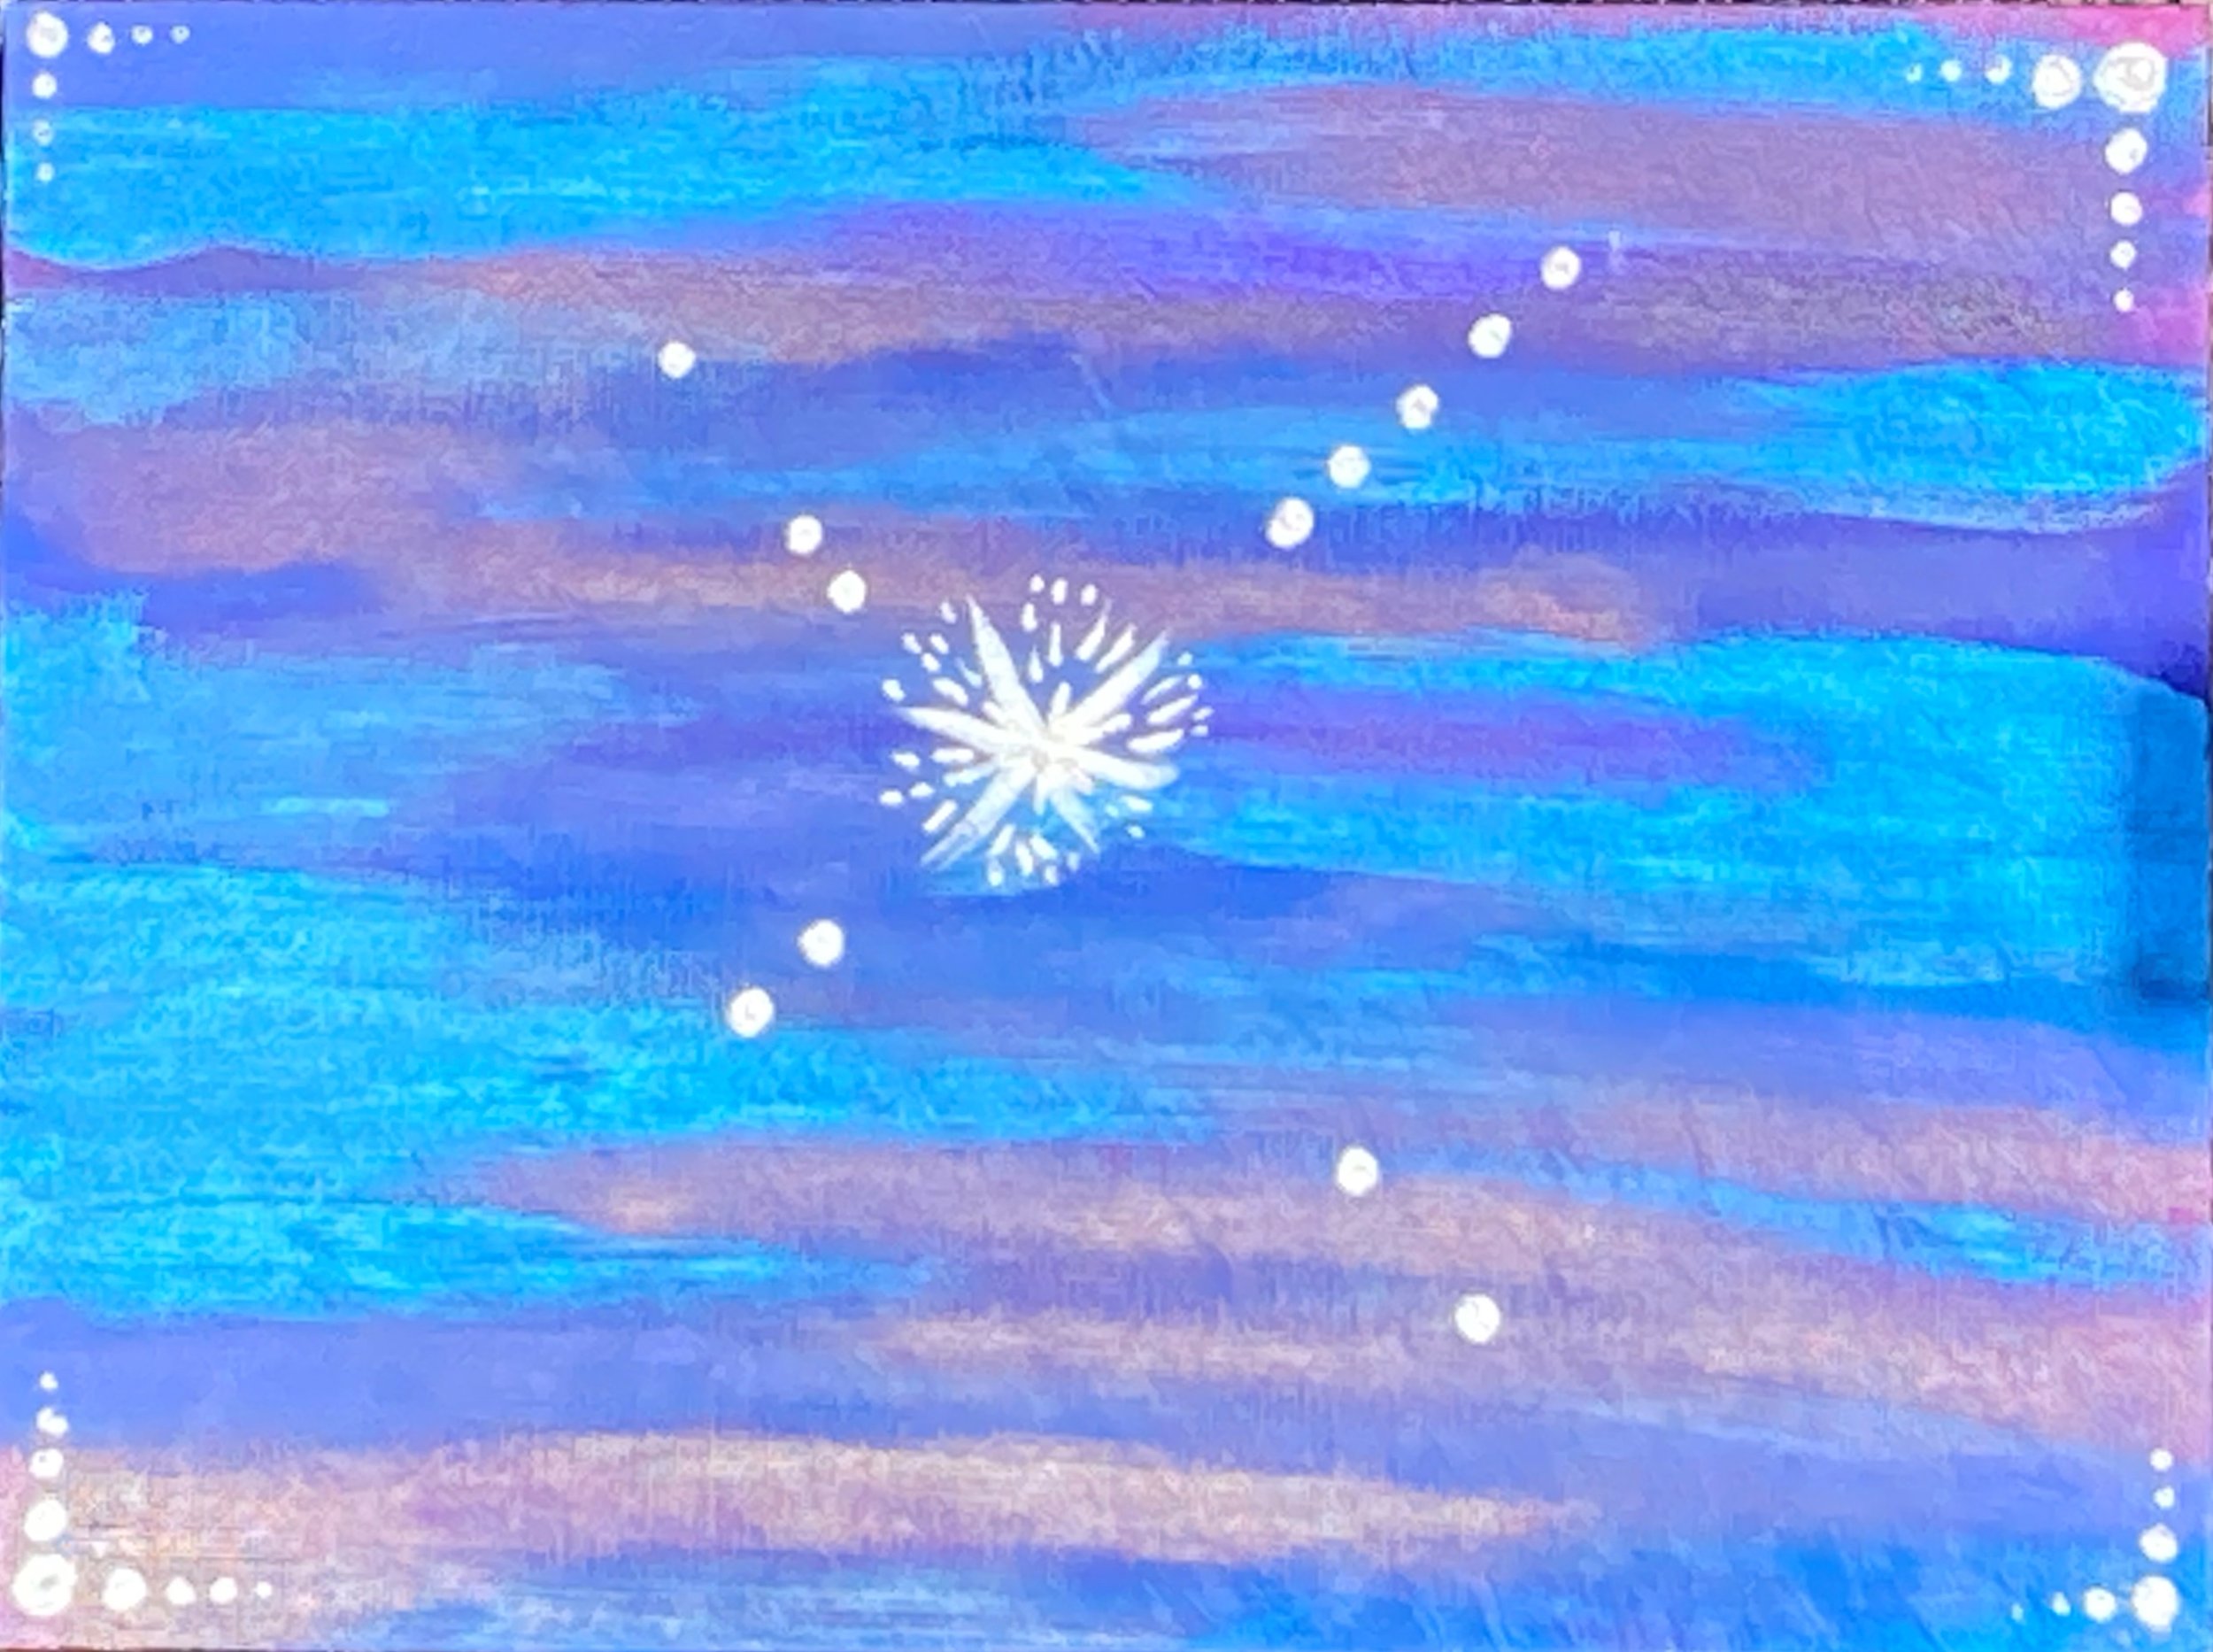  A painting of a silver star on a blue and purple background with four sets of dots radiating outwards in orthogonal directions, each dot representing a point in a design process.  